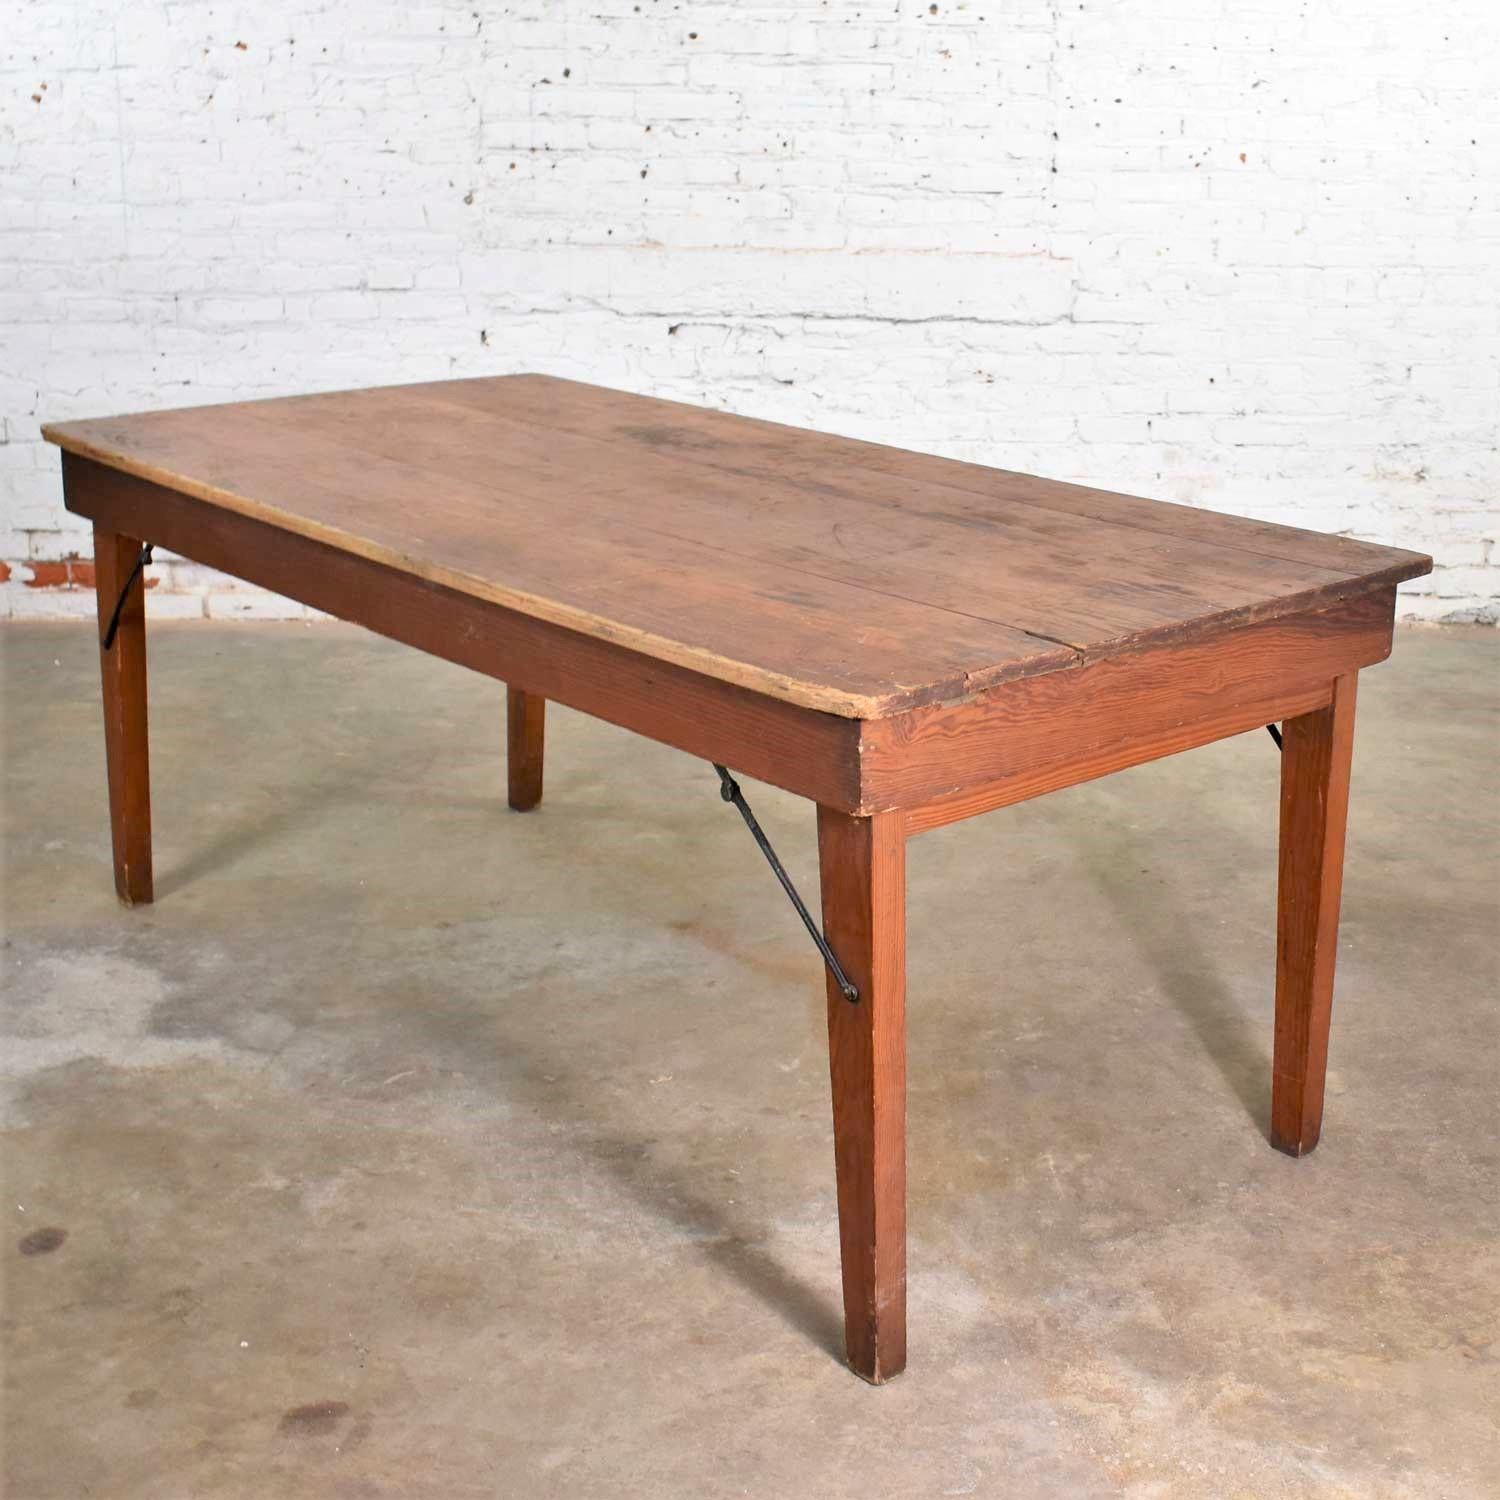 20th Century Vintage Pine Industrial Rustic Worktable or Farmhouse Table with Folding Legs